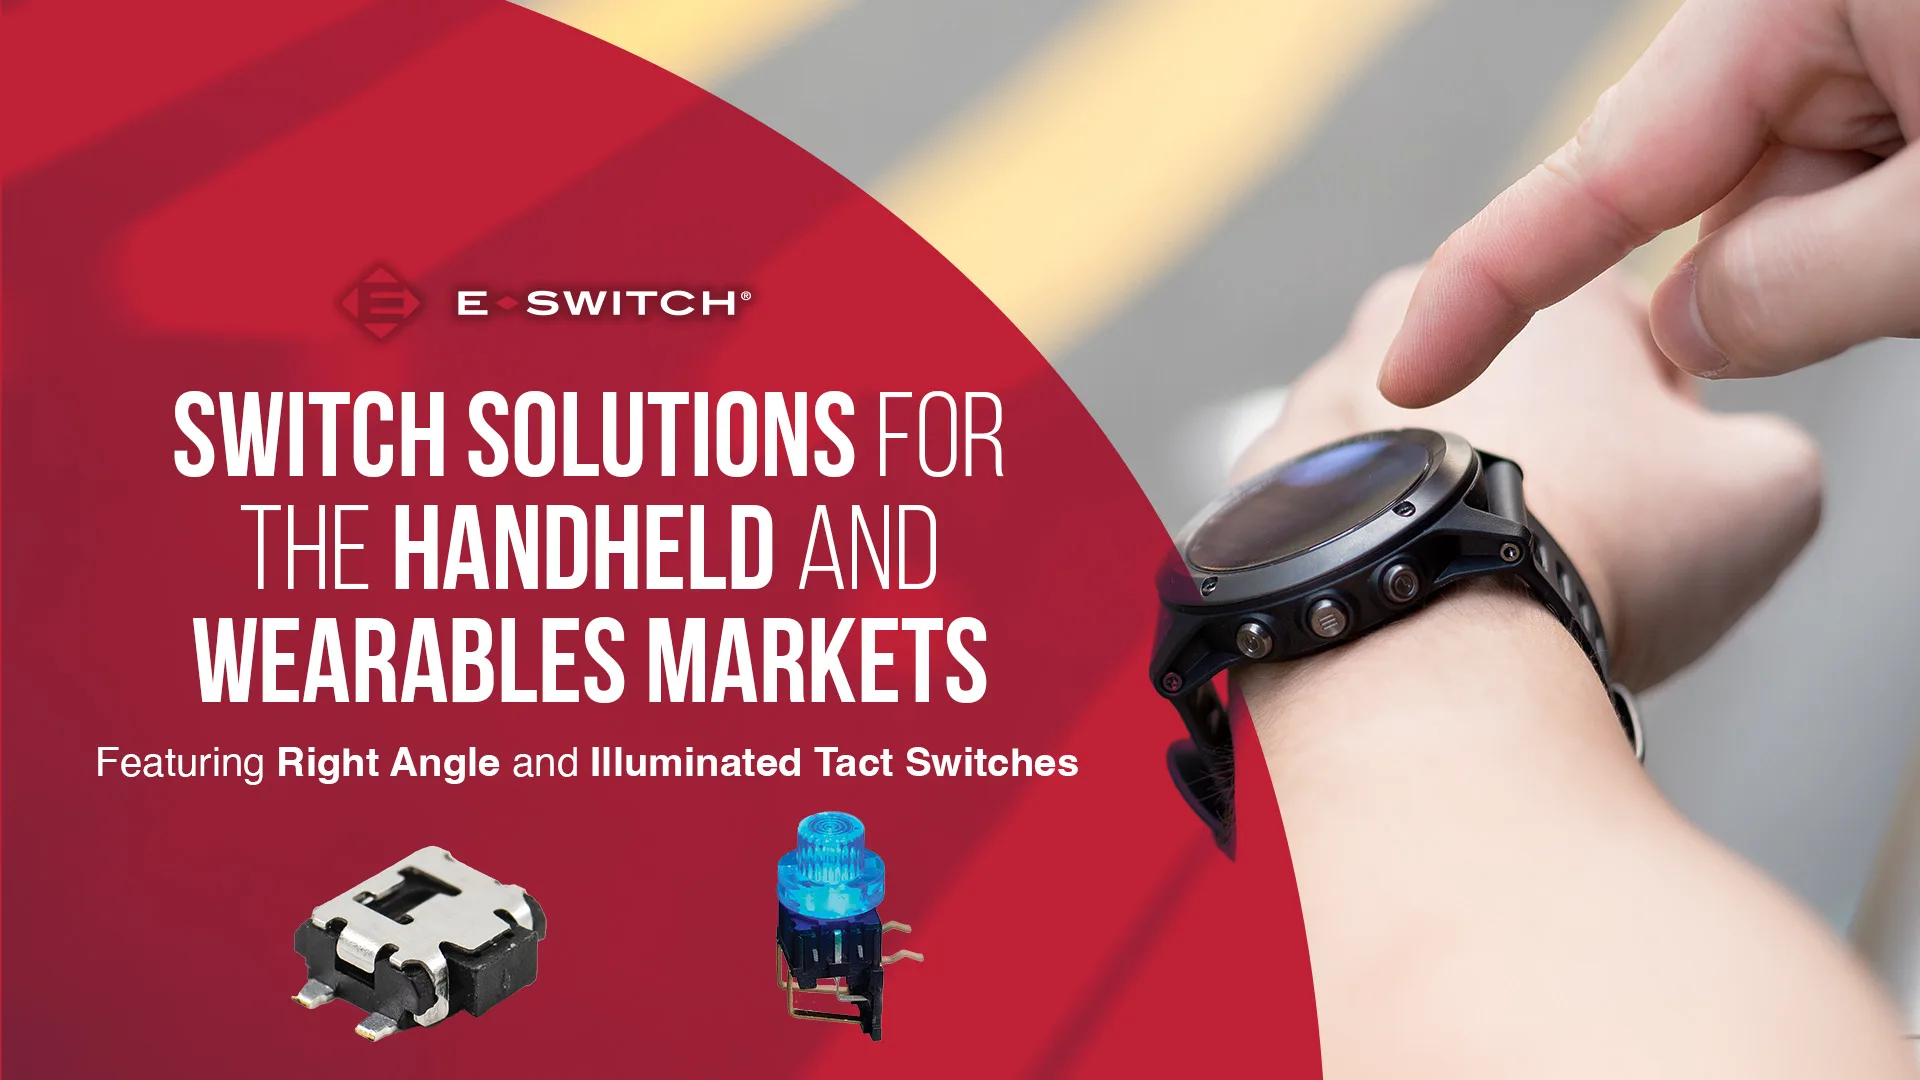 Switch Solutions For The Handheld And Wearables Markets Featuring Right Angle And Illuminated Tact Switches